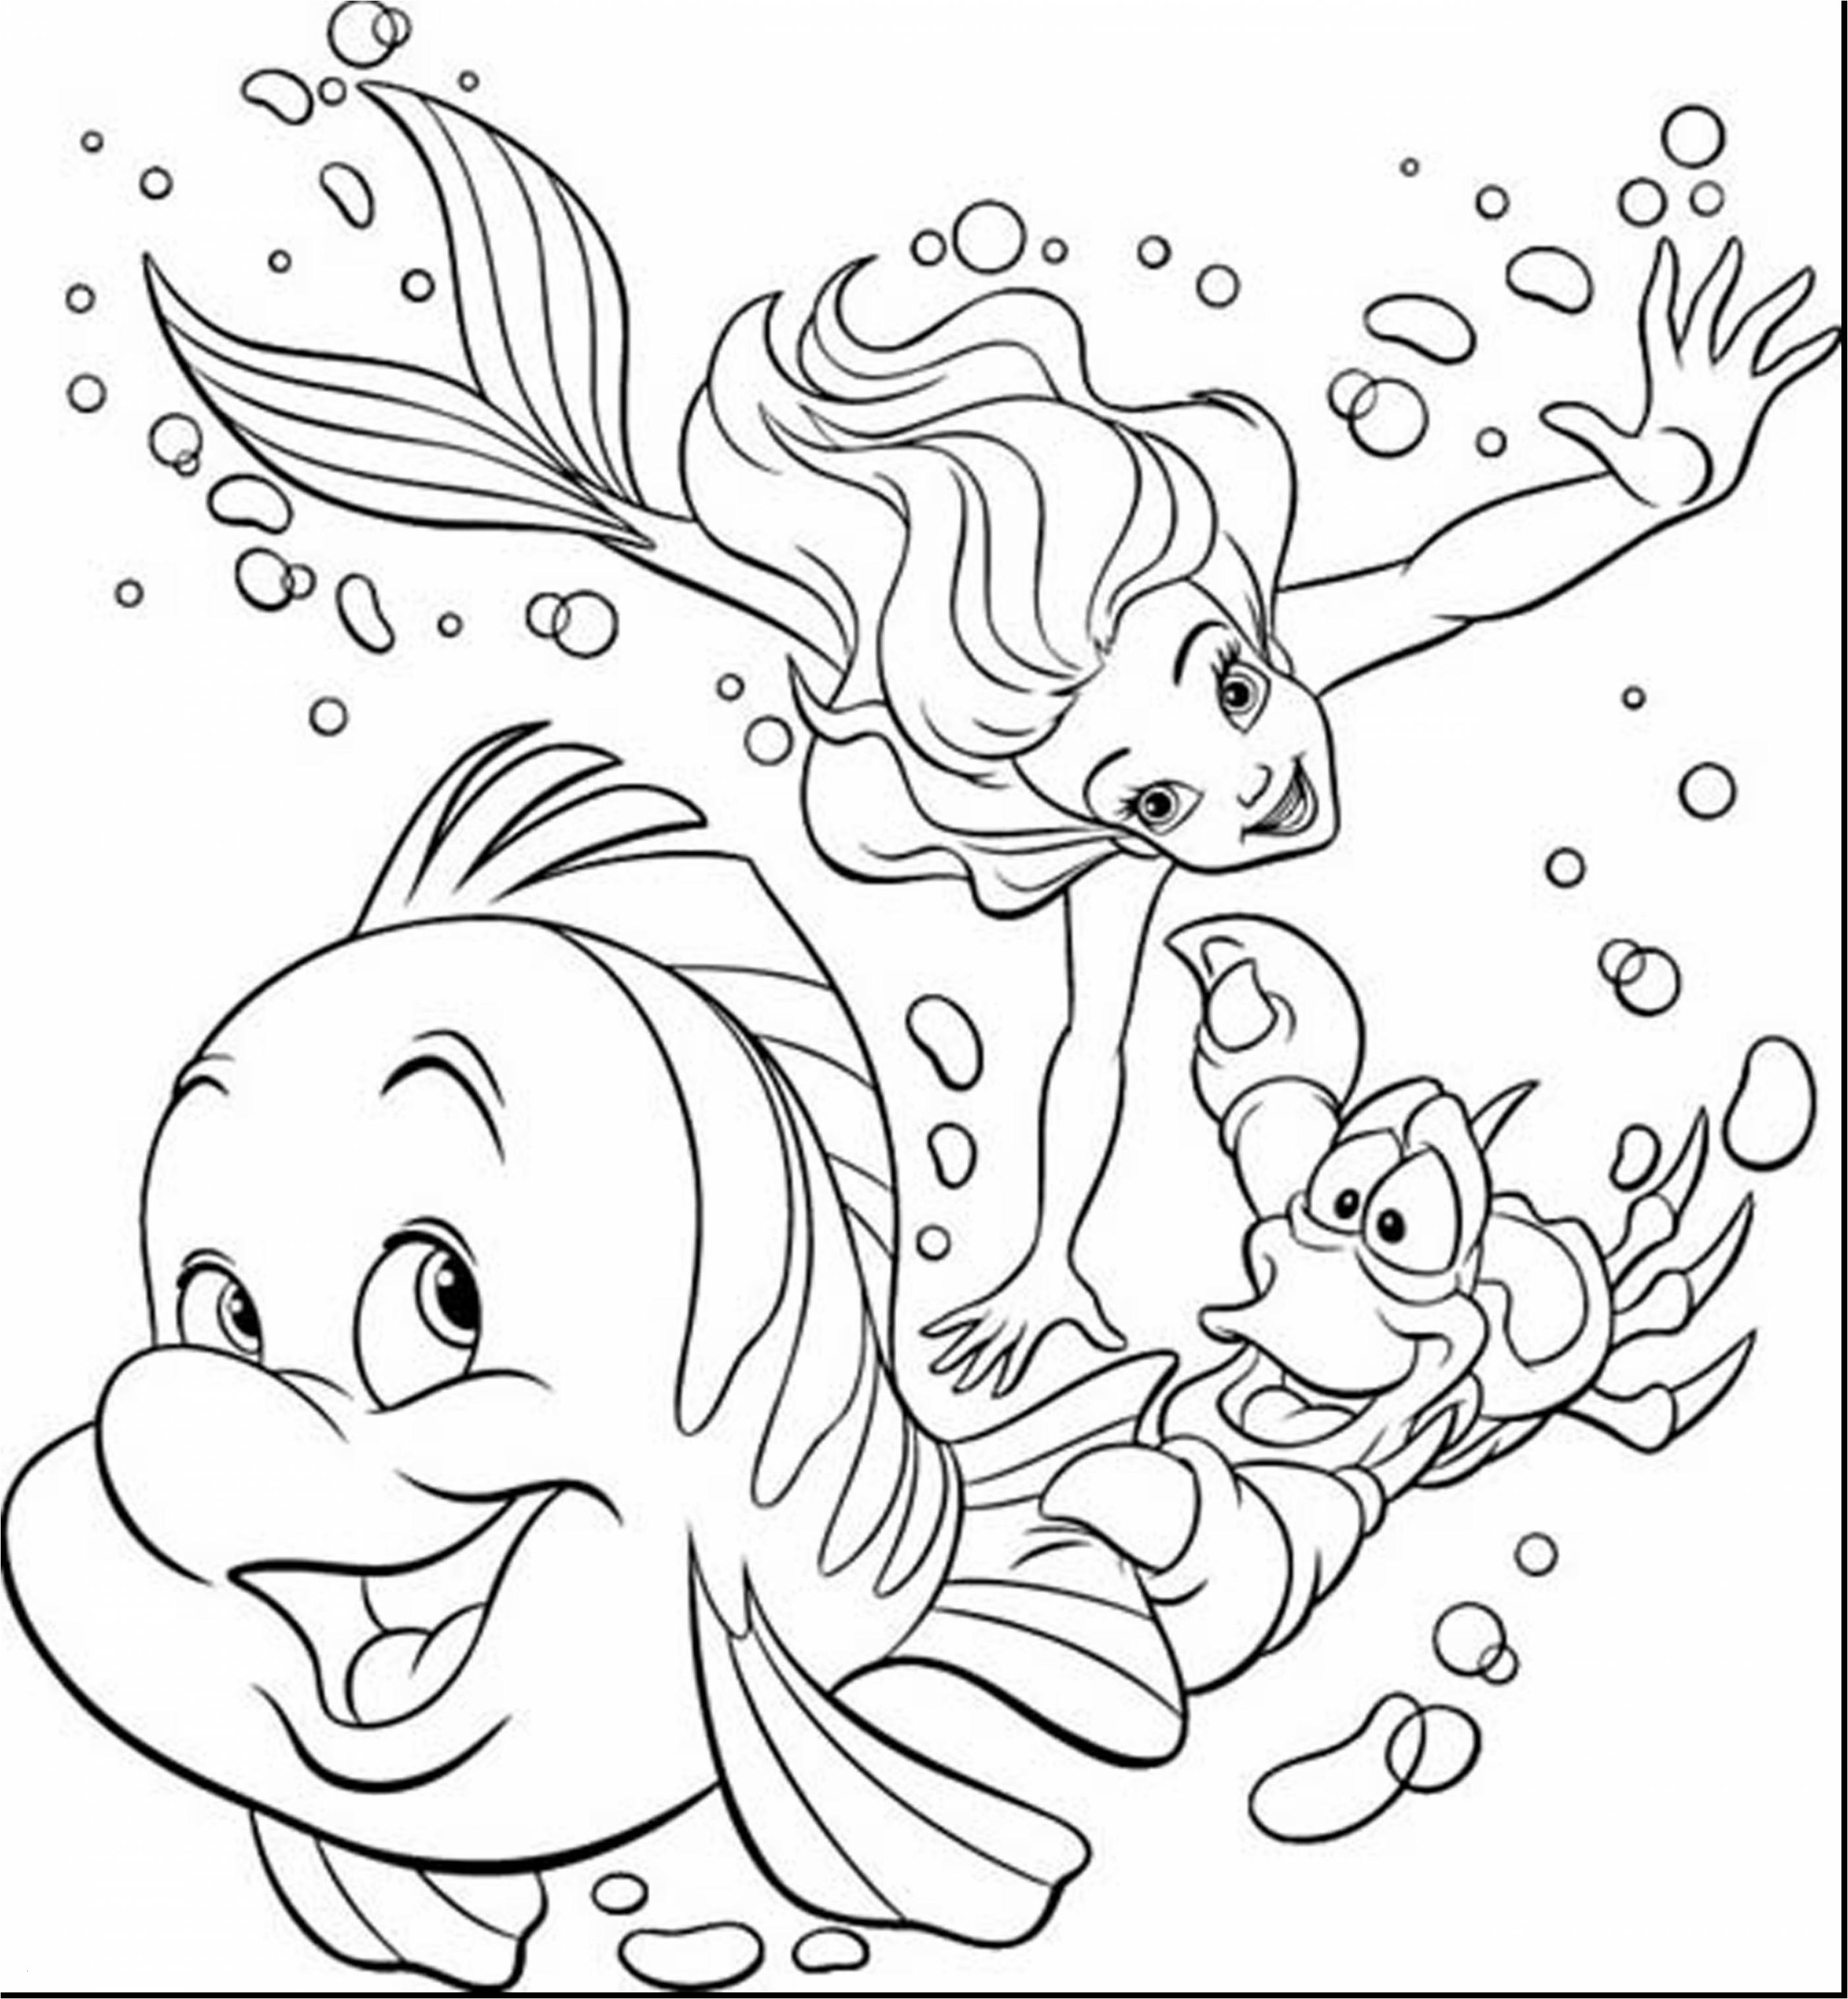 free-printable-princess-colouring-in-pages-of-free-printable-princess-colouring-in-pages Free Printable Princess Colouring In Pages Cartoon 